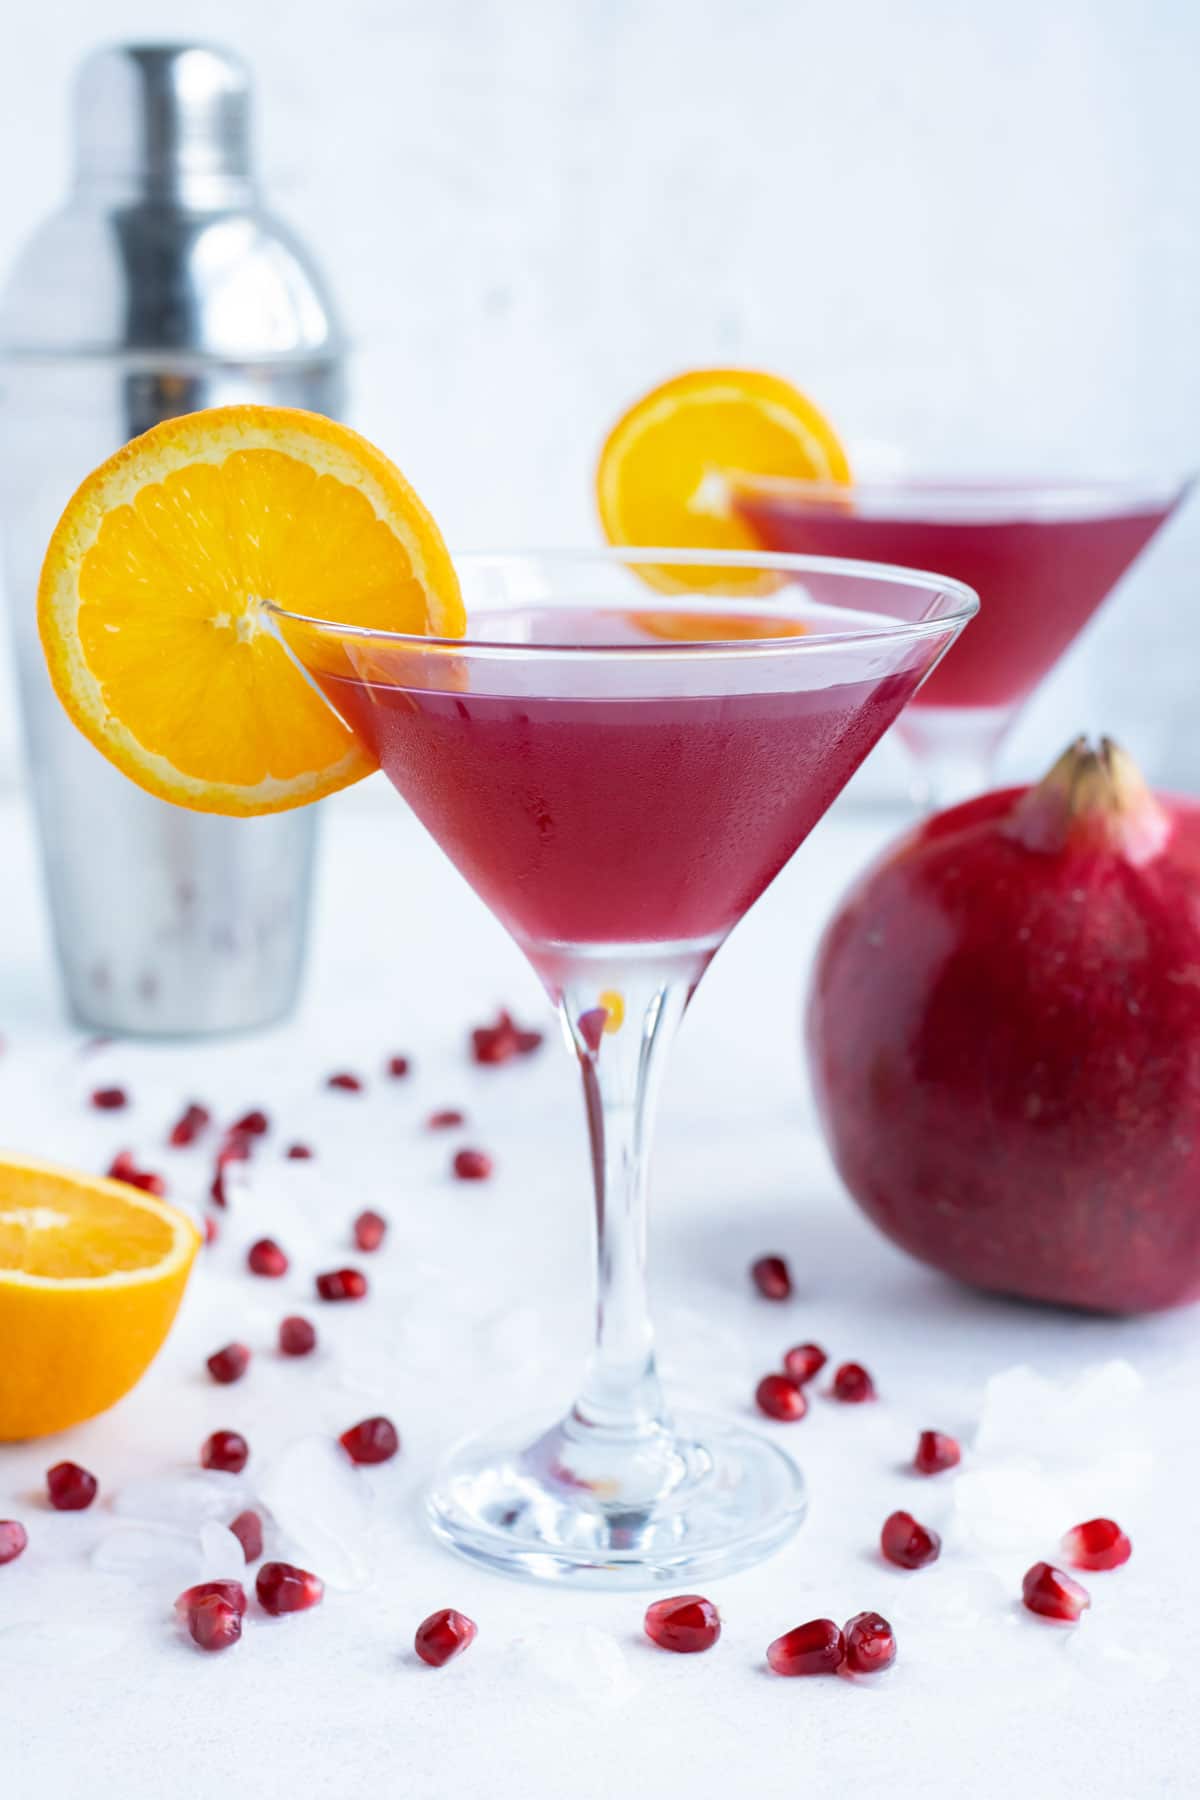 Pomegranate Lemon Drop Martini - The Perks of Being Us